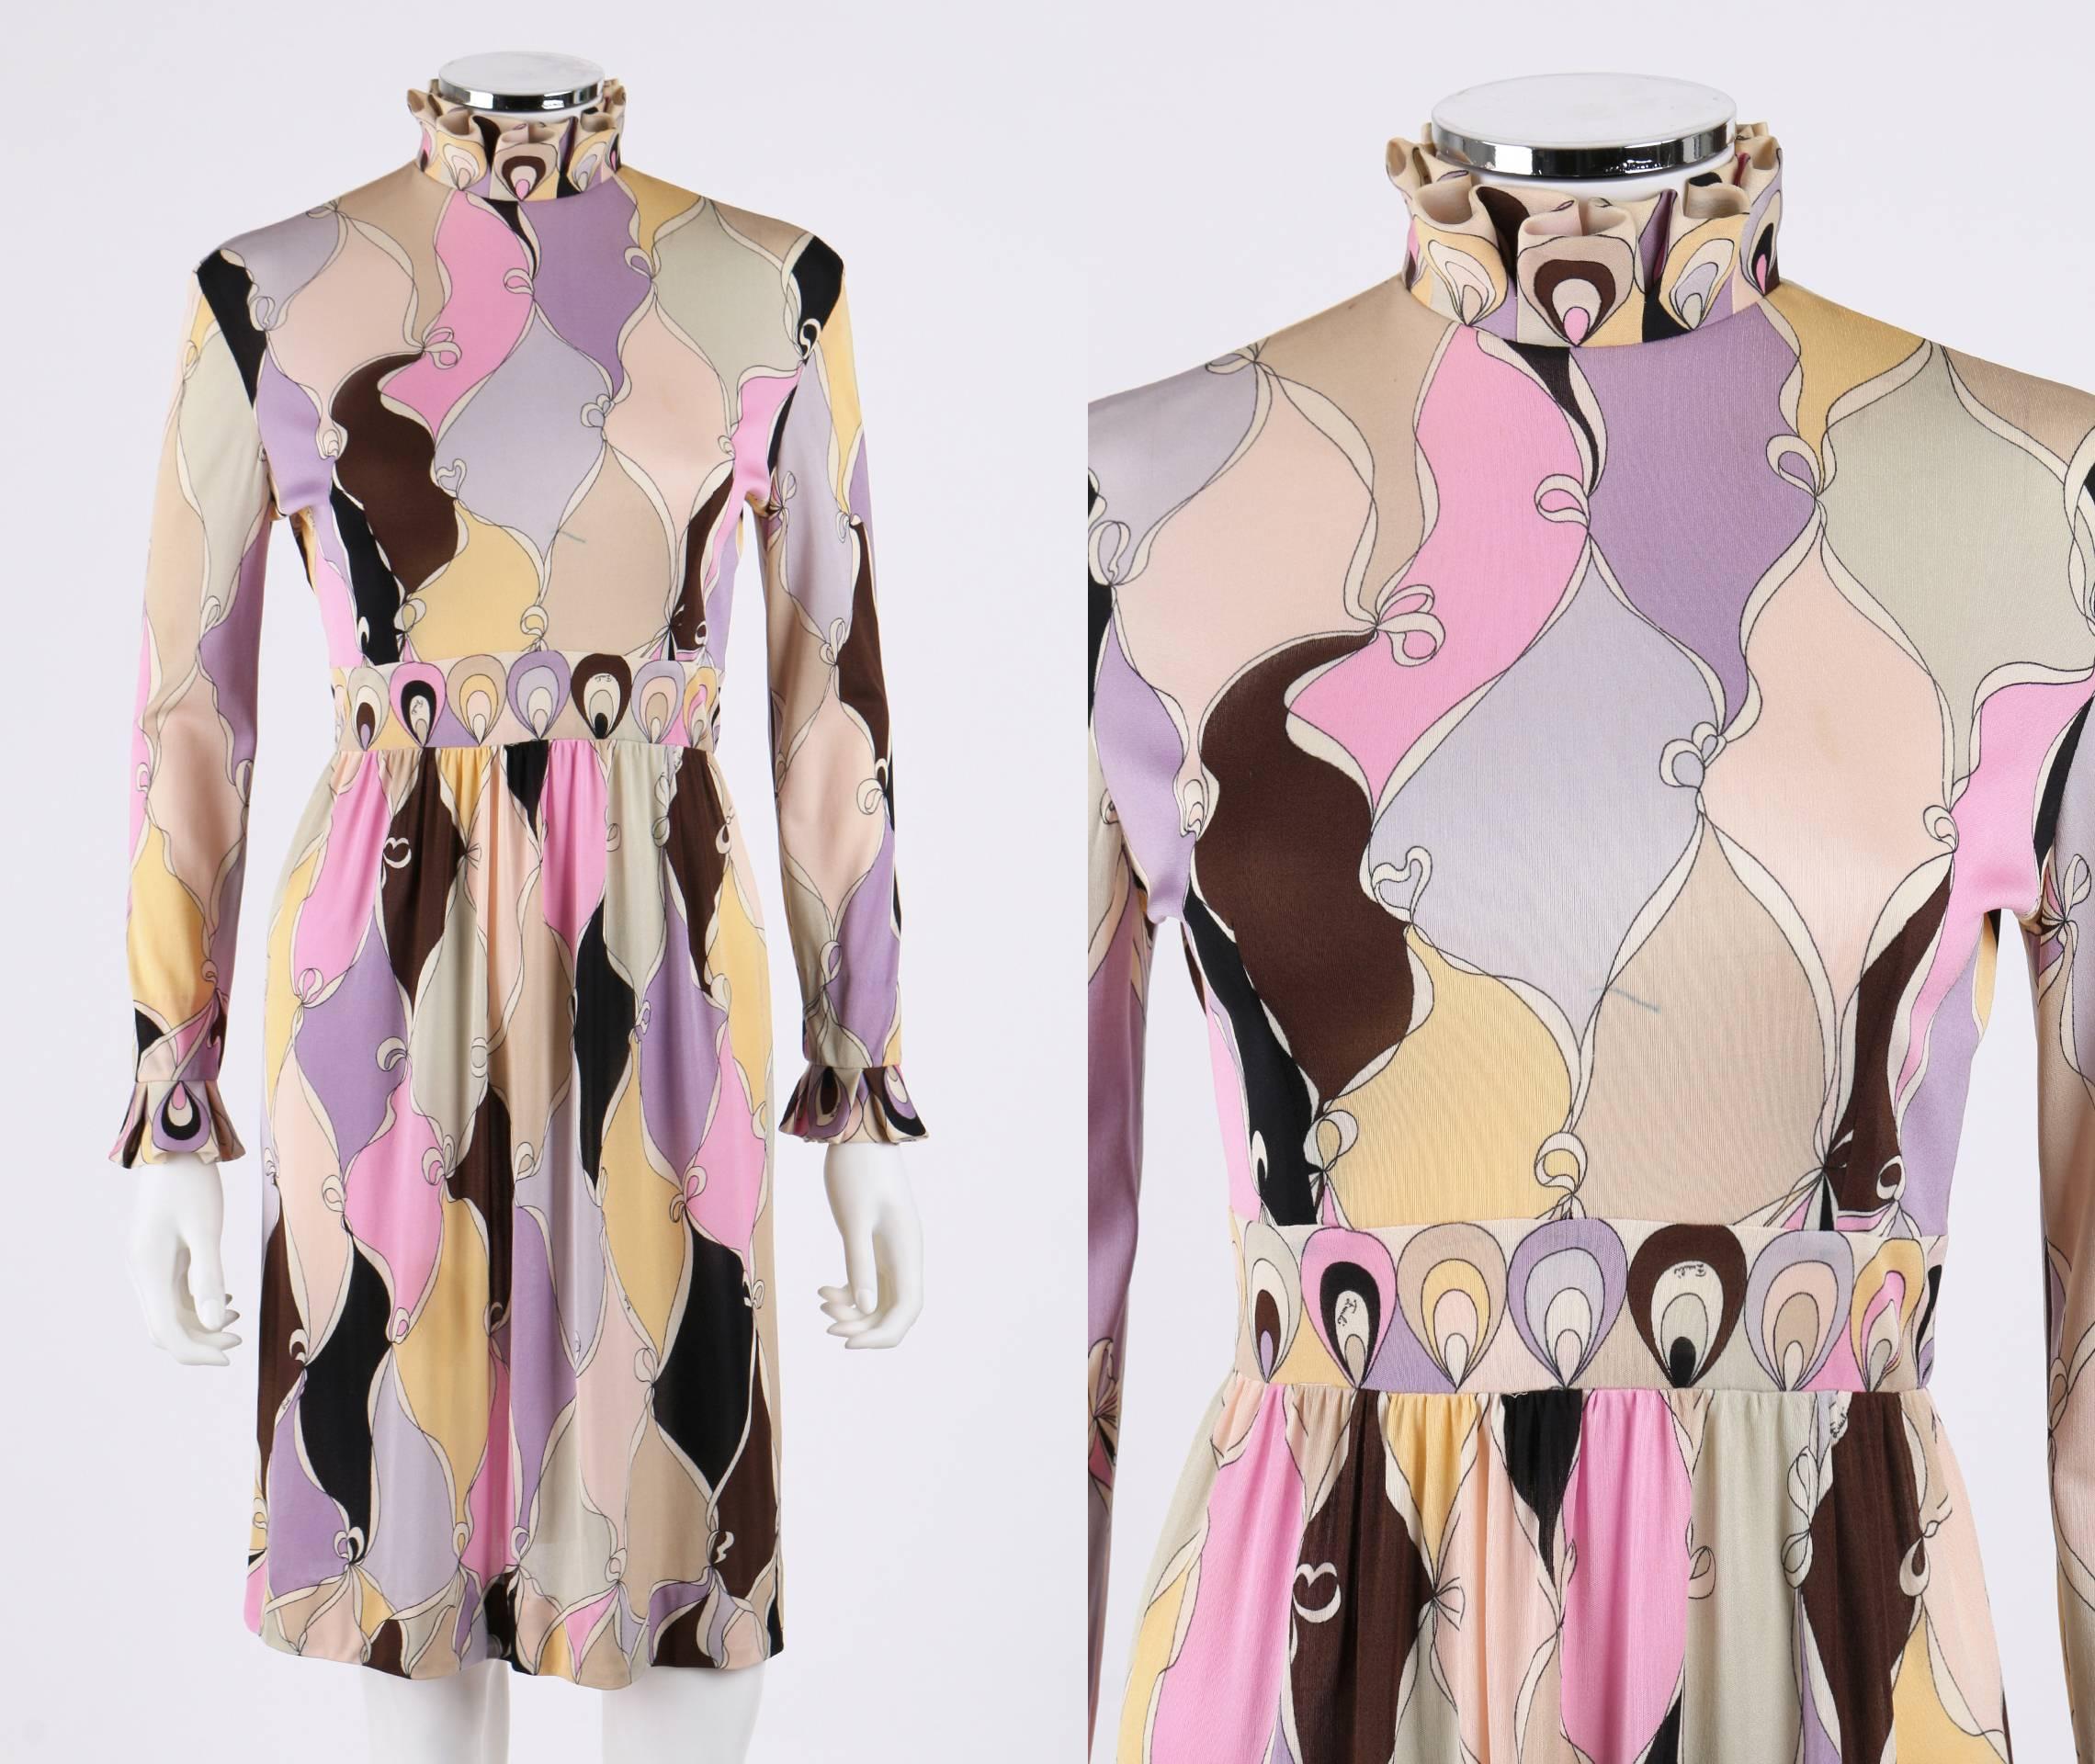 Vintage c.1960's Emilio Pucci multicolor pastel abstract diamond signature print silk jersey dress. Long sleeves. Box pleated mock neckline and cuffs. Yoked waist. Decorative border at collar, waist and cuffs. Center back zipper and hook/eye